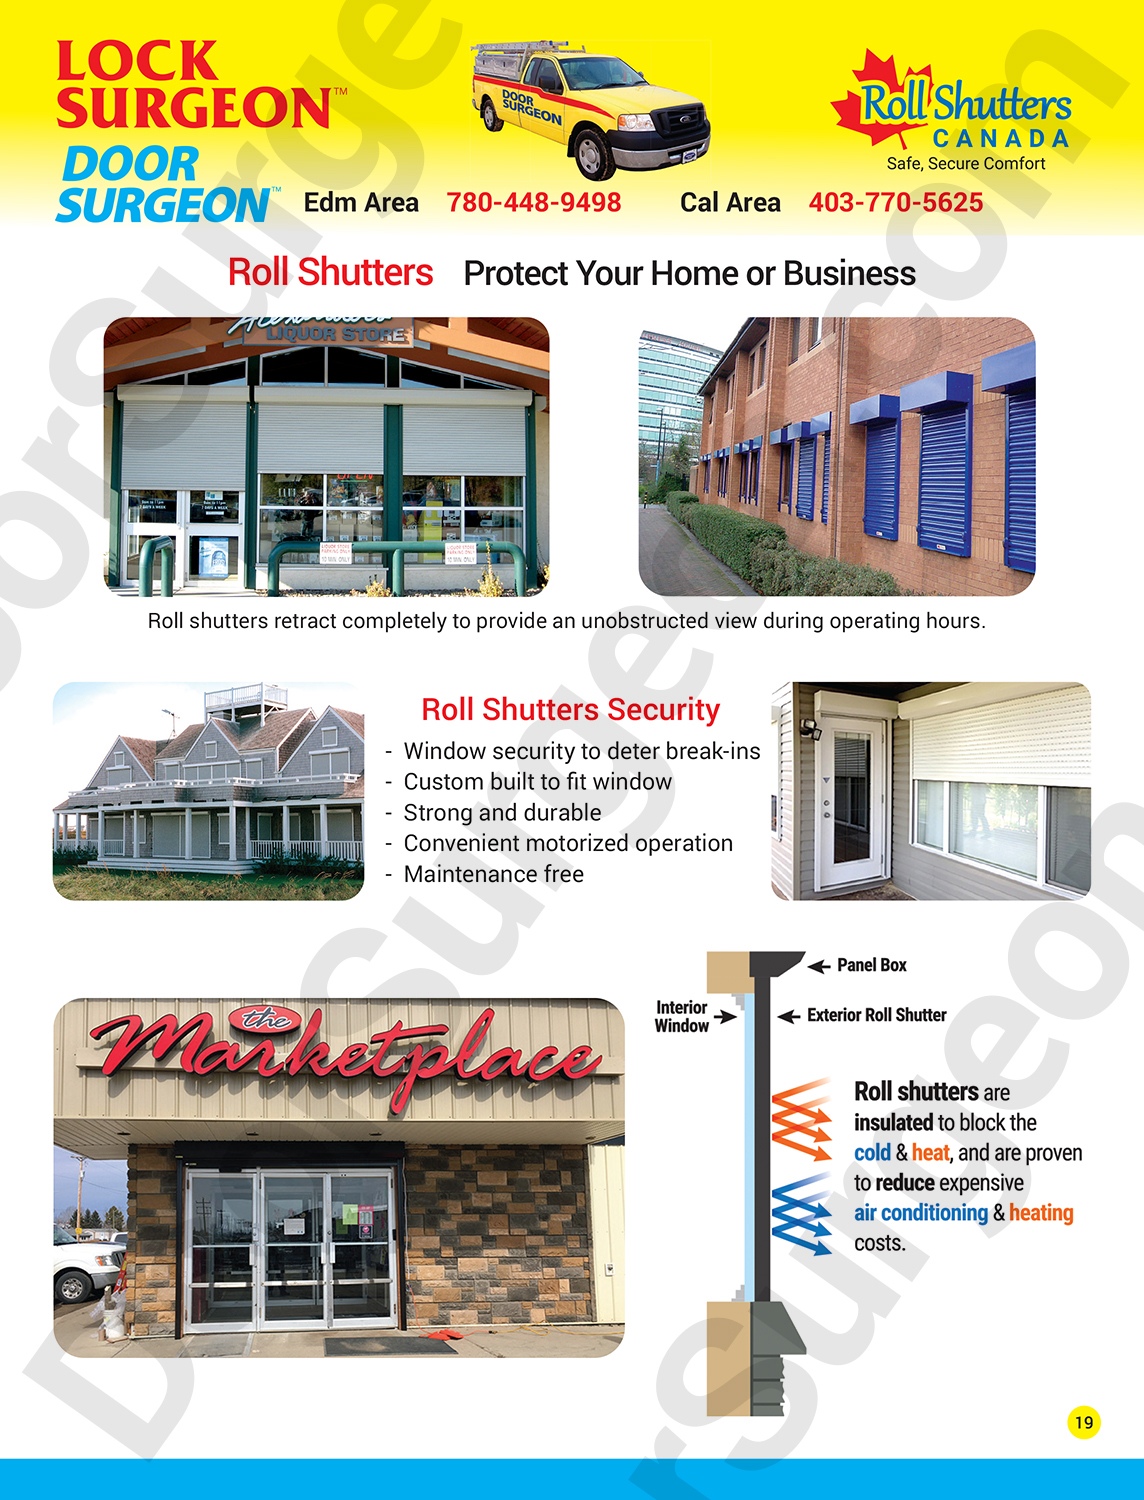 Roll shutters for storefronts, industrial complexes, inventory protection, windows and entrances.